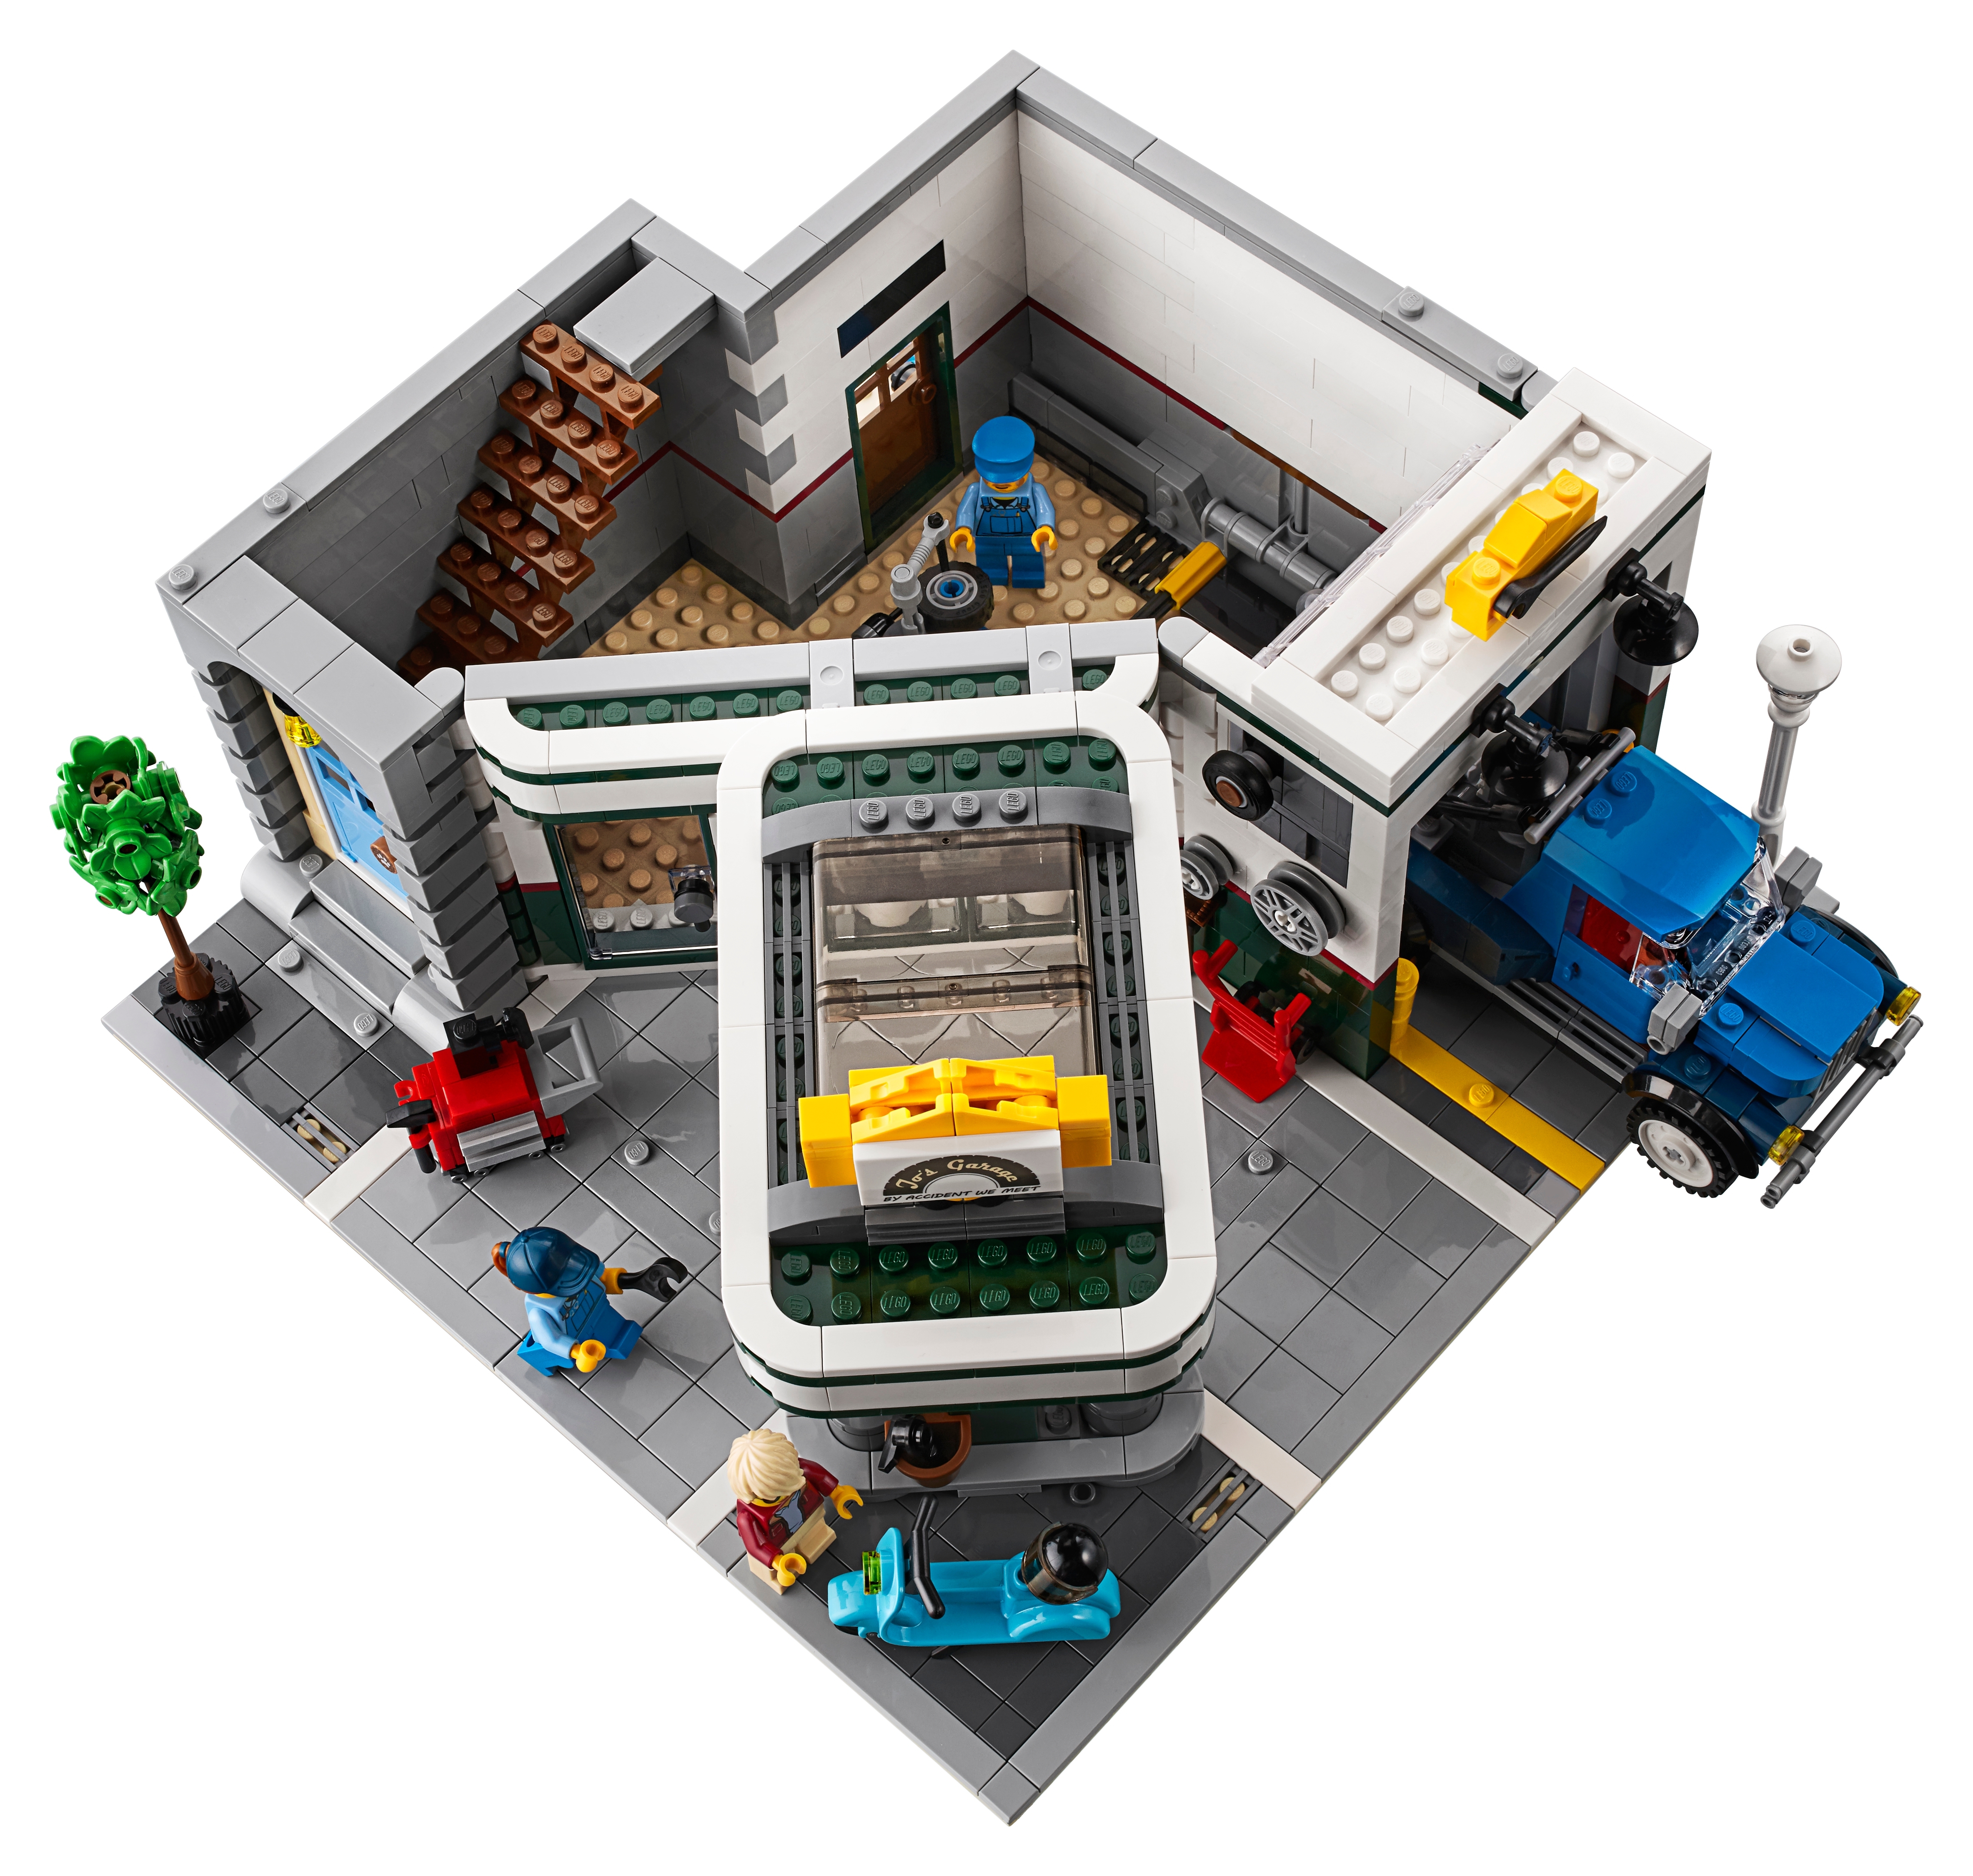 Corner 10264 Creator | Buy online at the Official LEGO® US